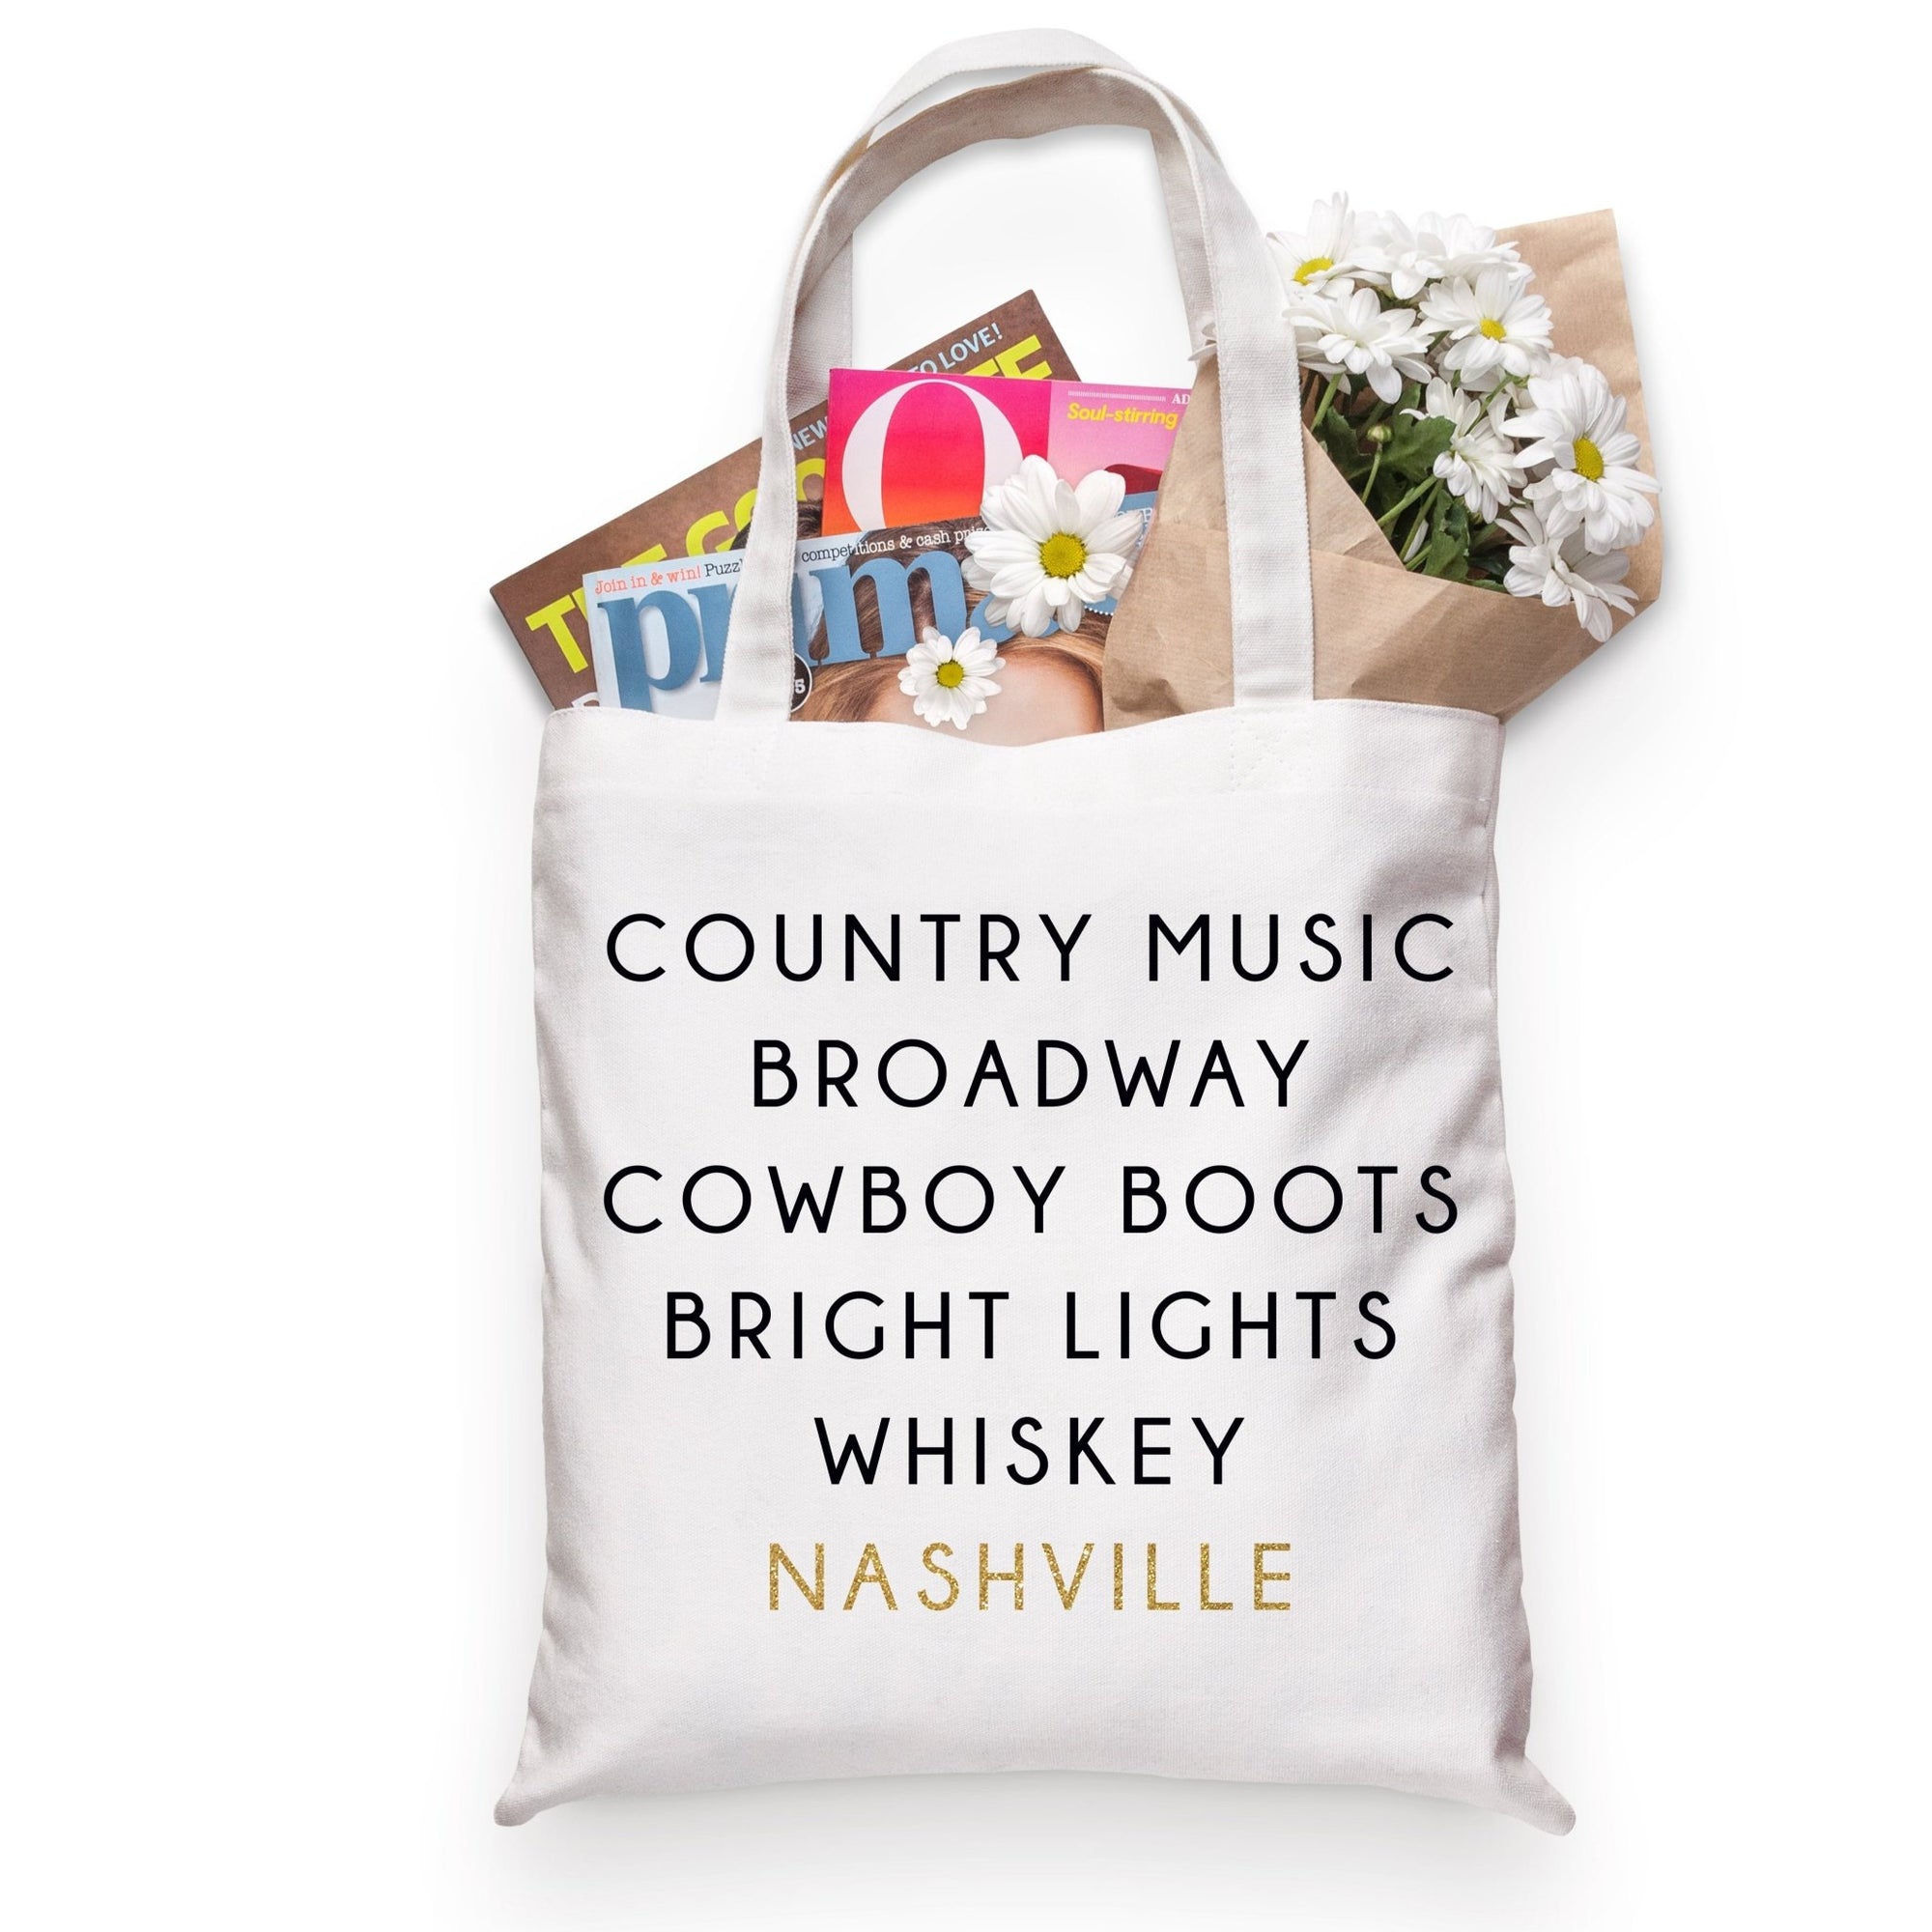 A tote is customized for a trip to Nashville.